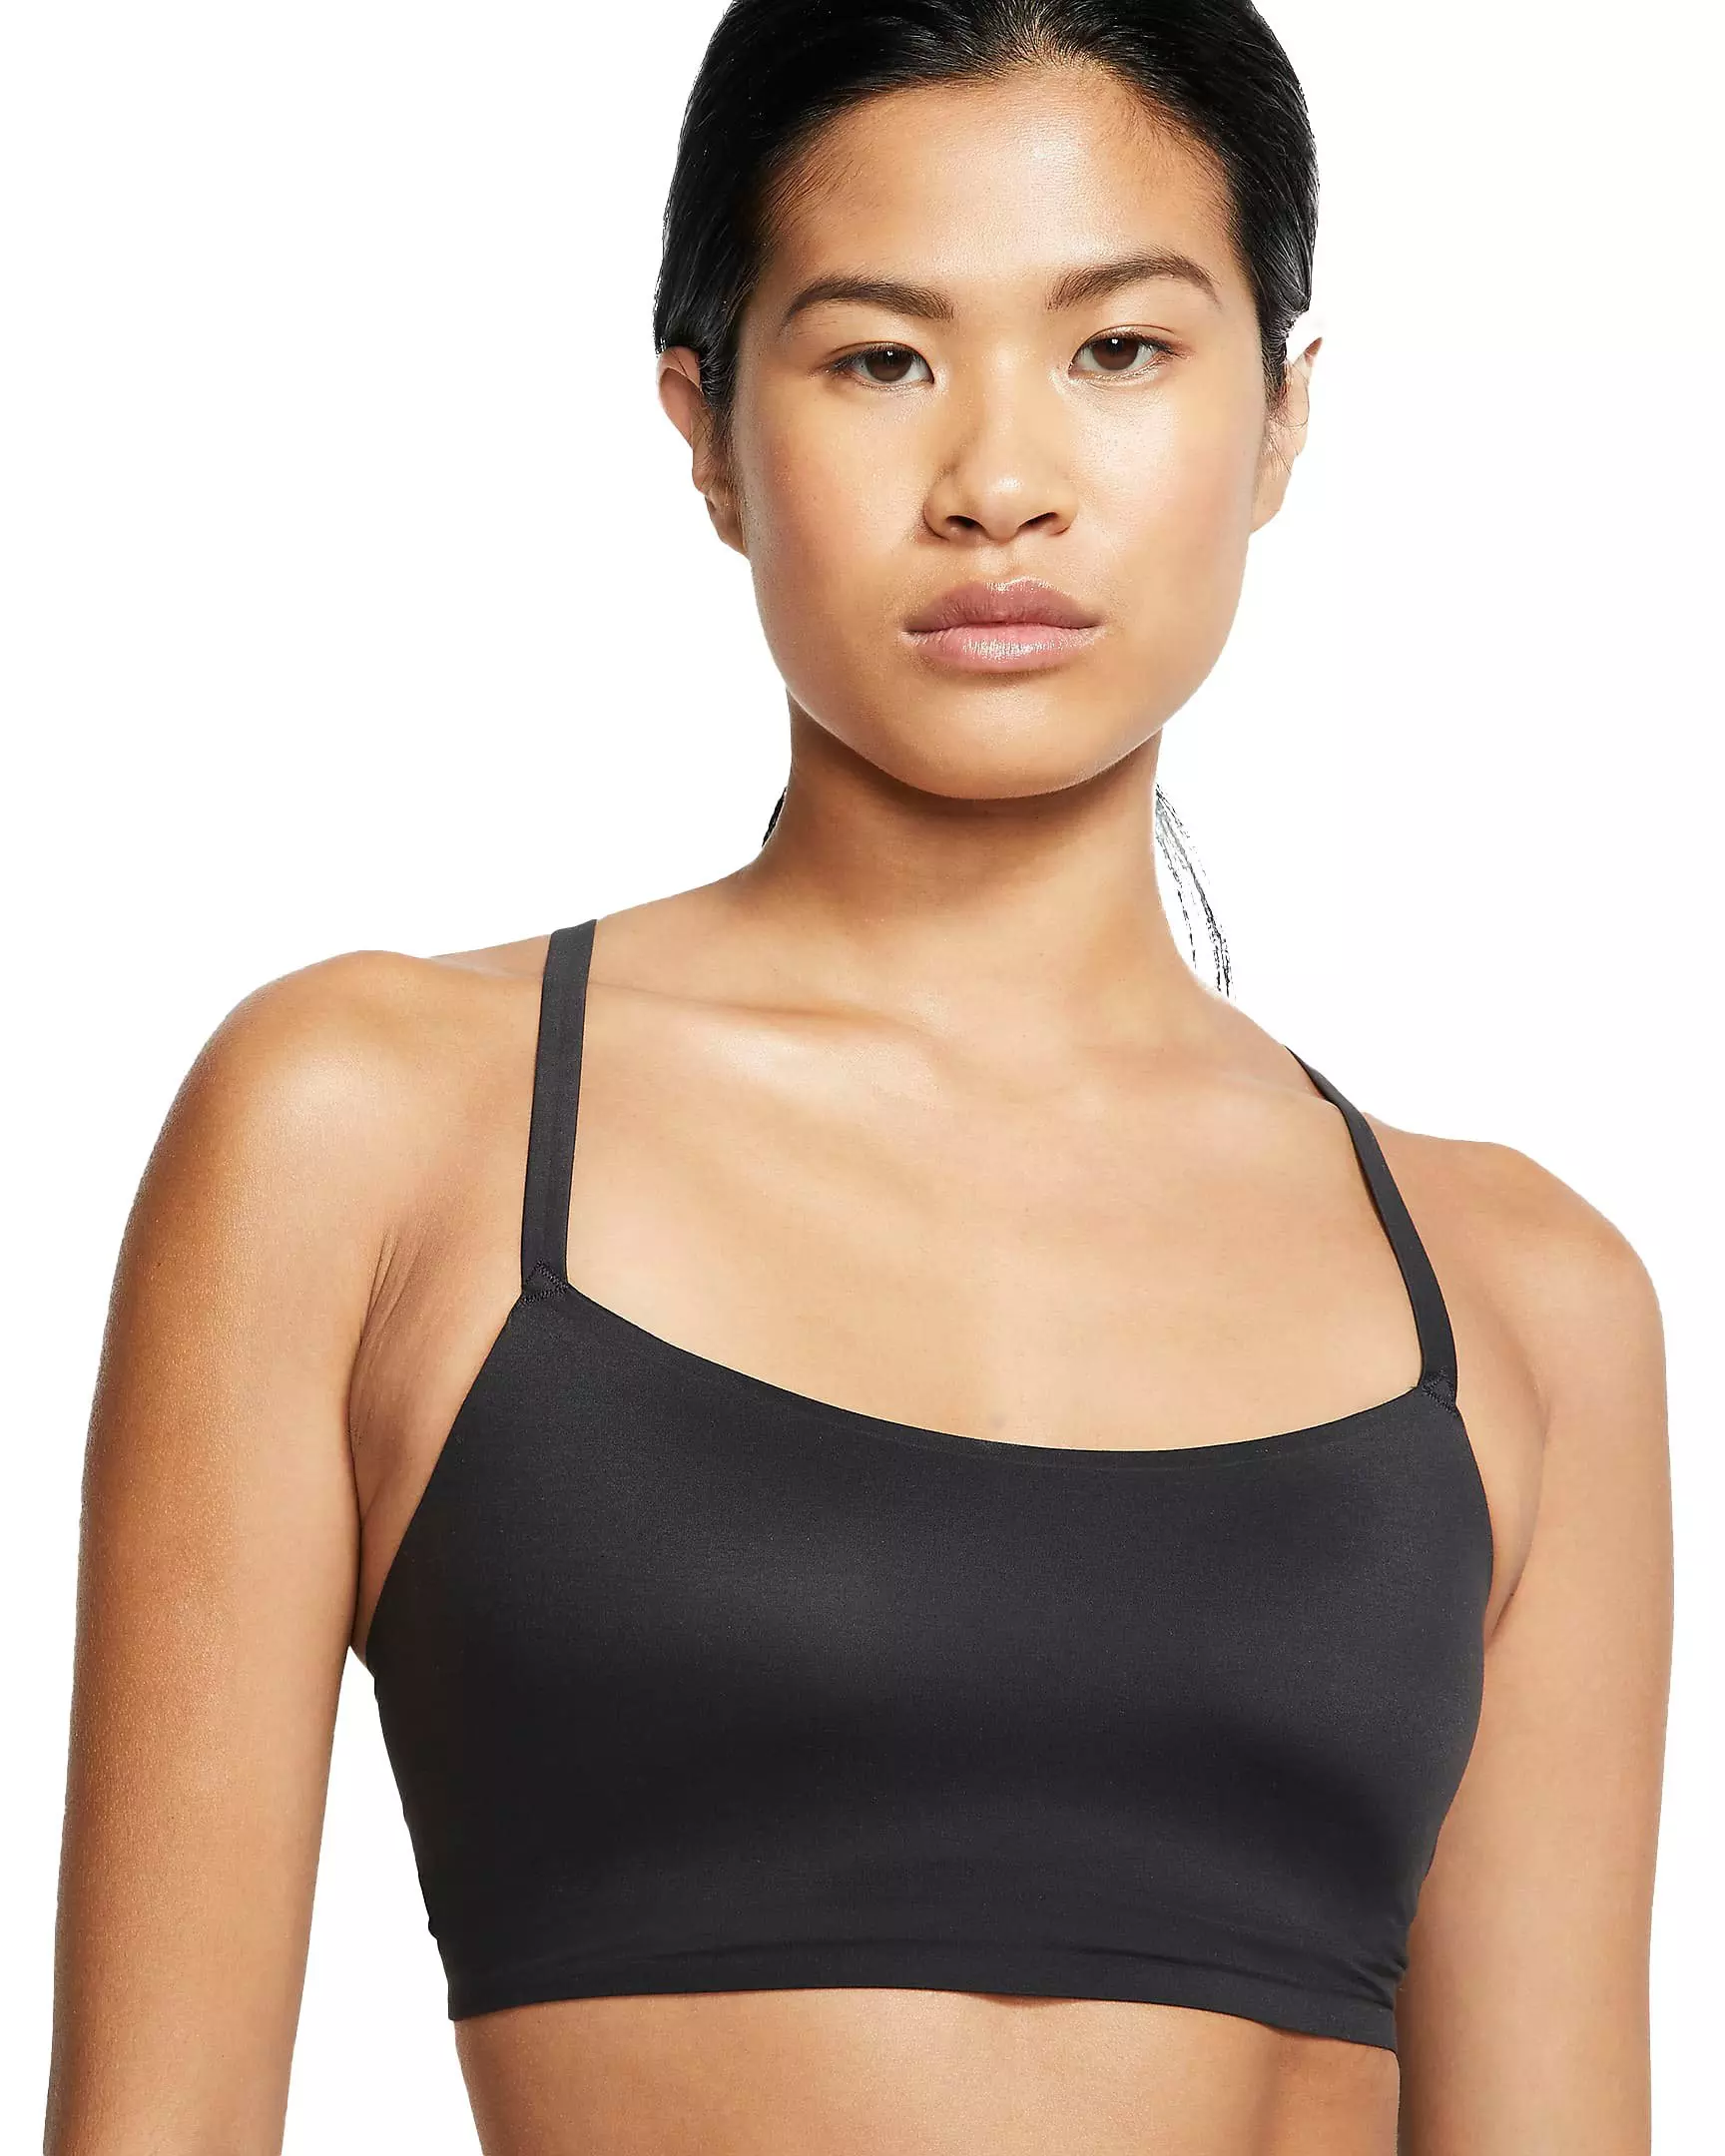 Nike Women's Light-Support Padded Convertible Indy Luxe Sports Bra